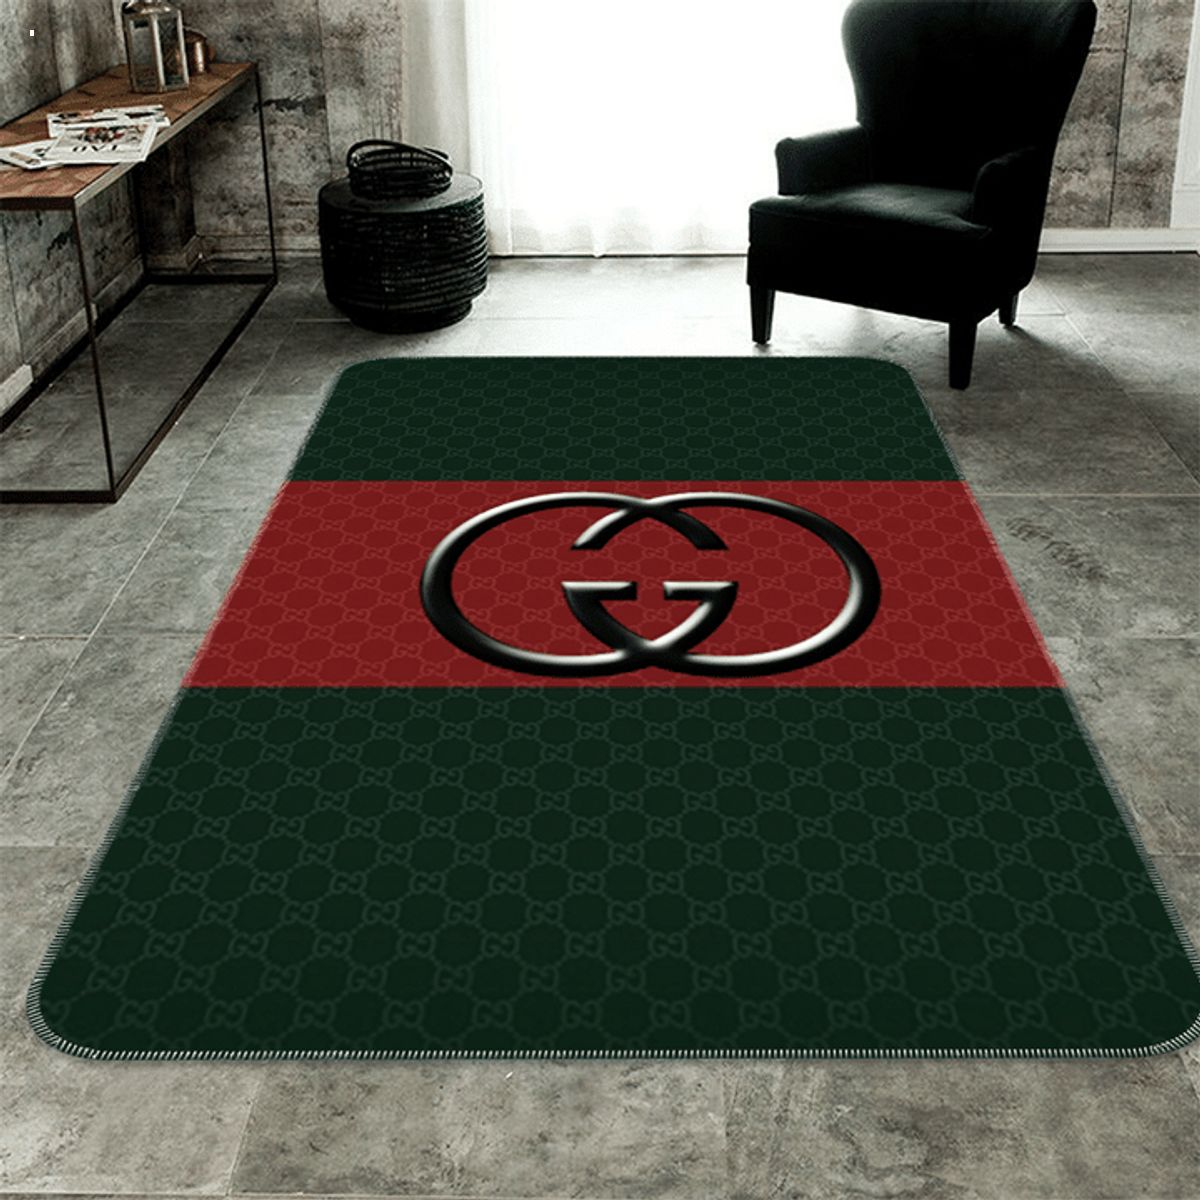 Gucci Green Mix Red Luxury Brand Carpet Rug Limited Edition